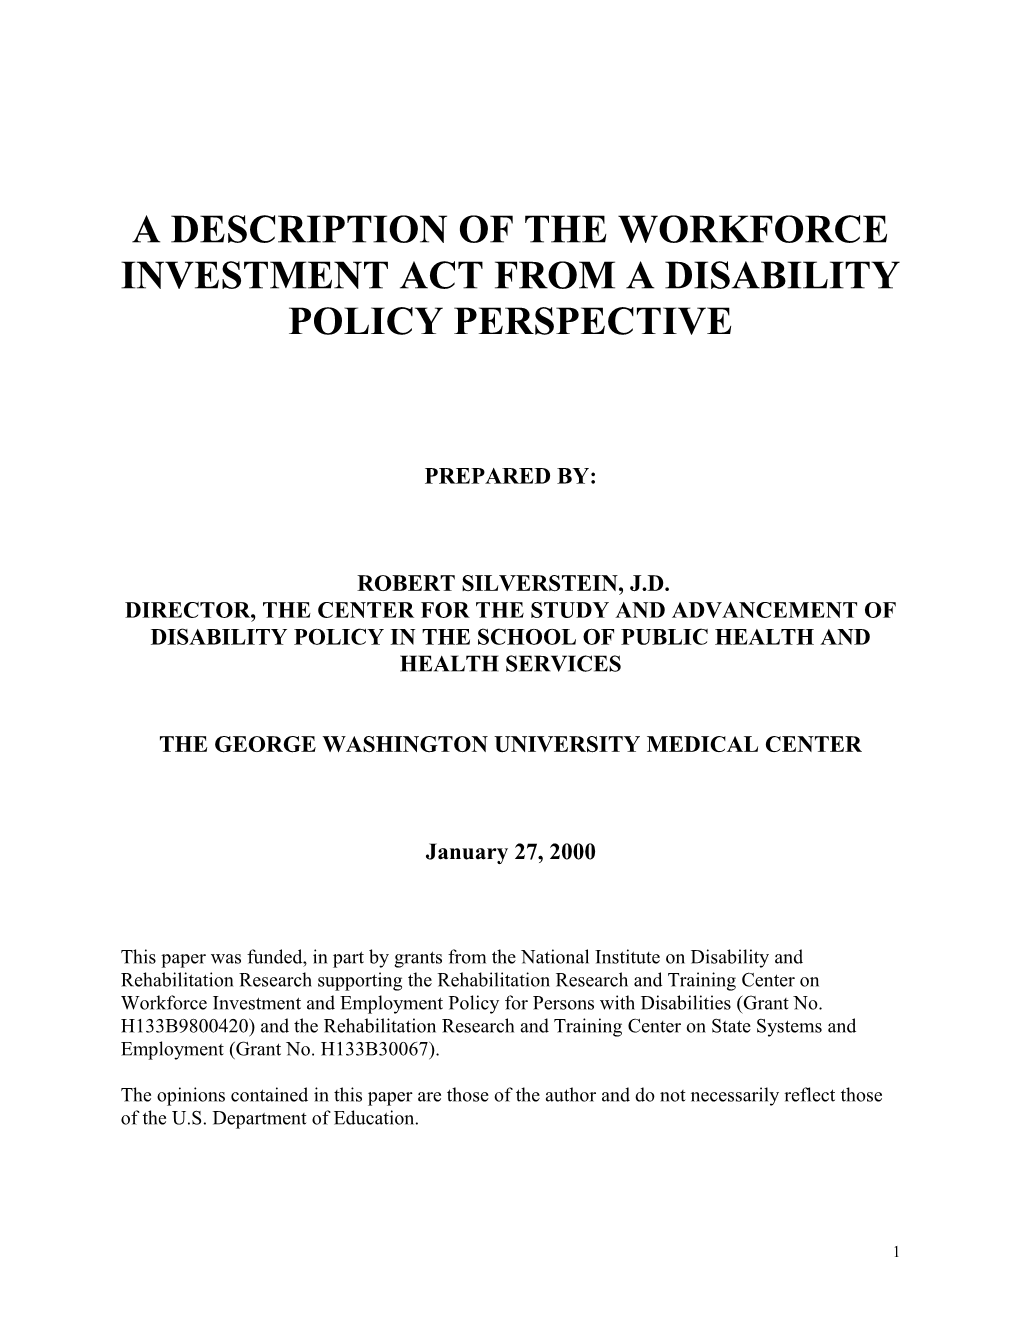 Description of Workforce Investment Act